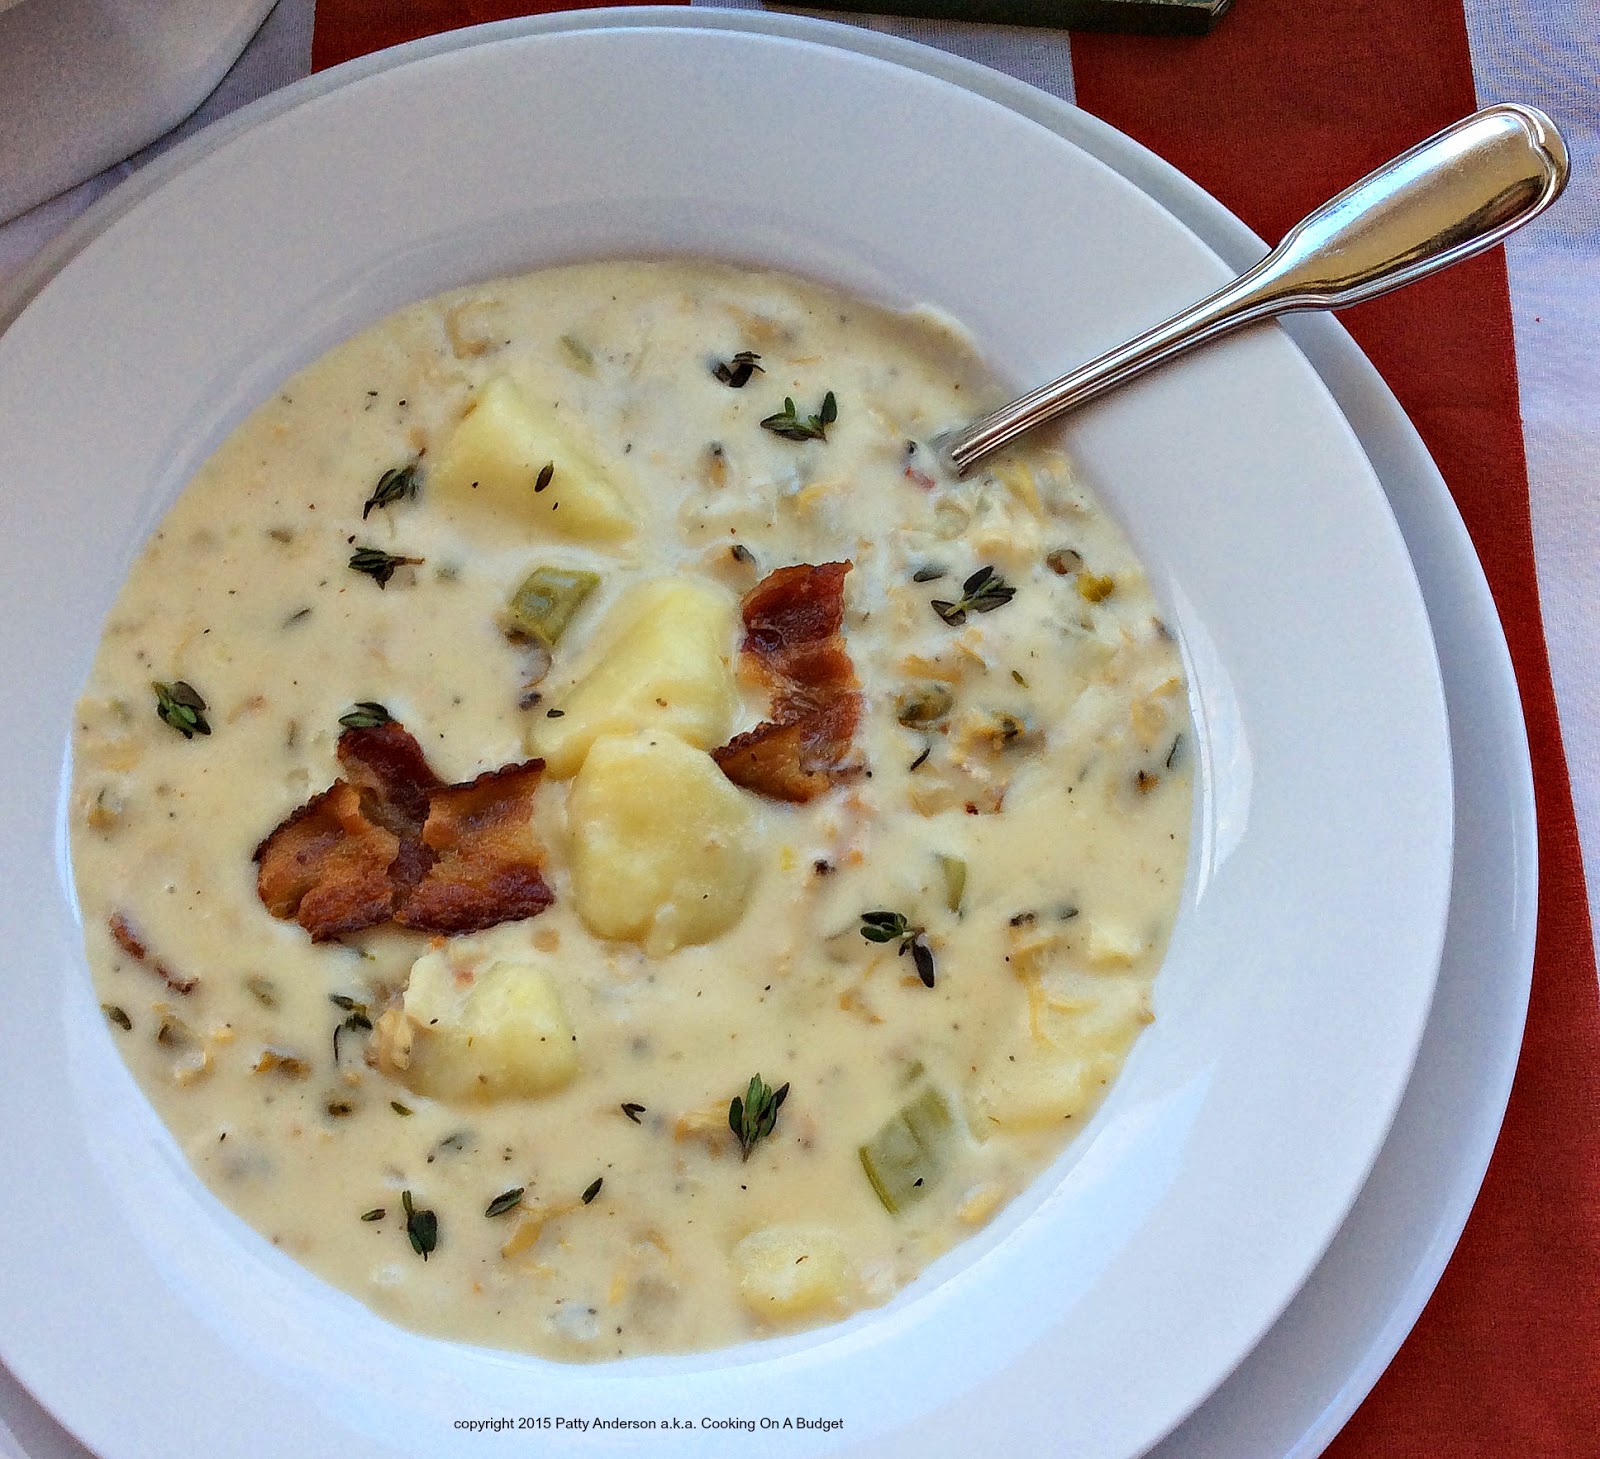 Cooking On A Budget: New England Clam Chowder - Creamy and Delicious!